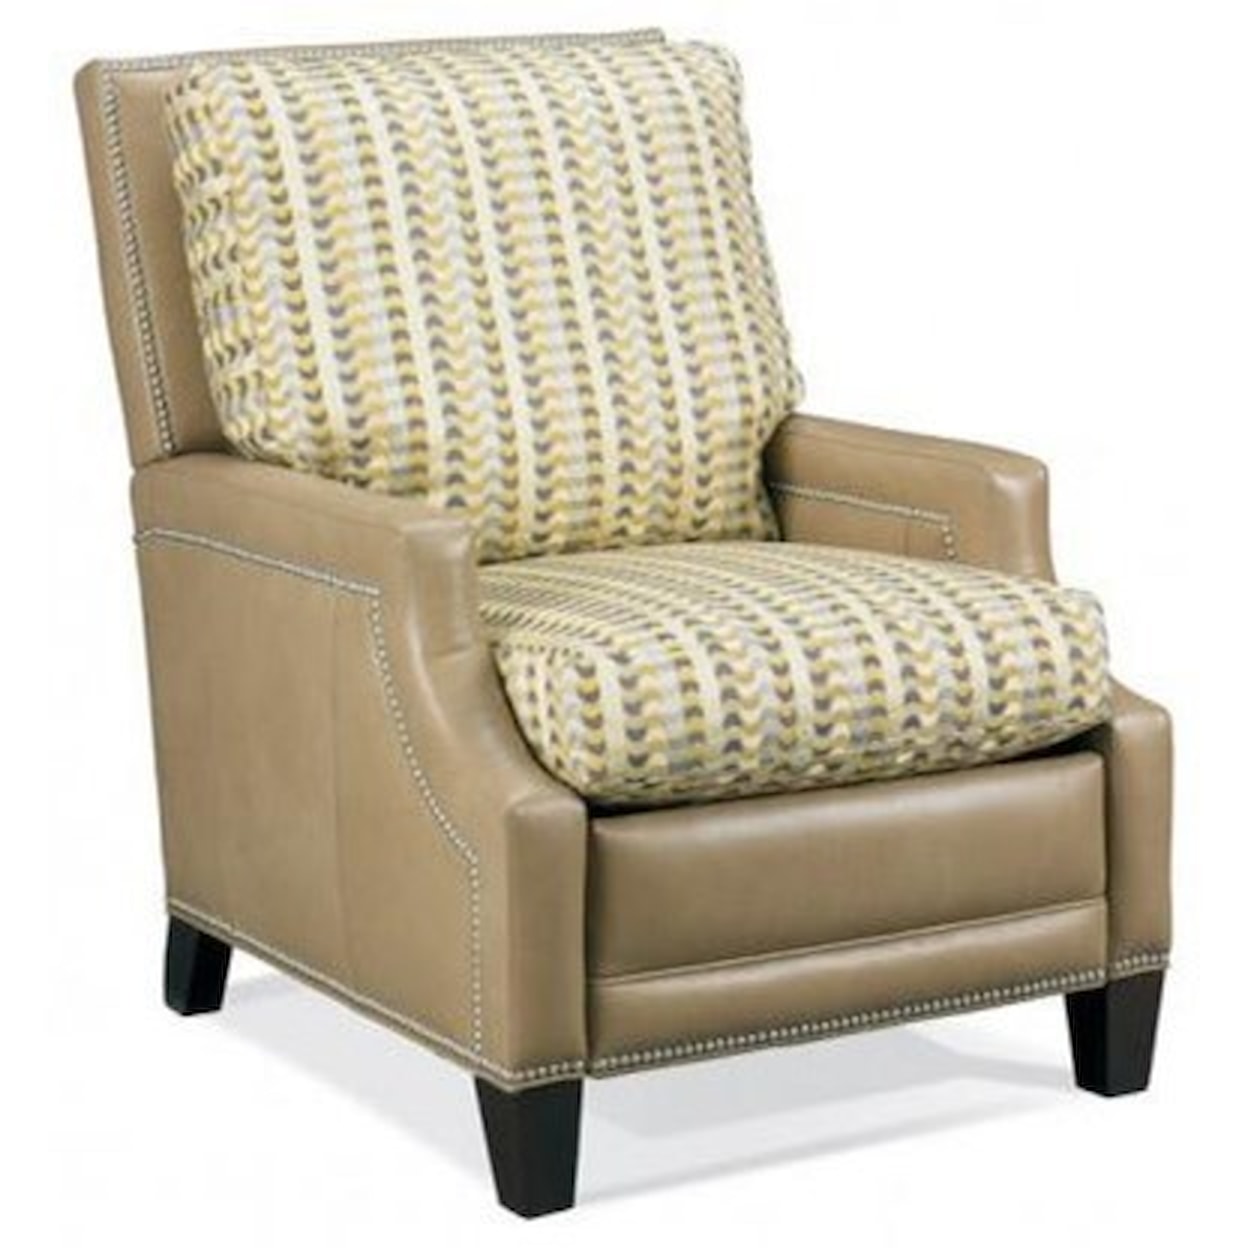 MotionCraft by Sherrill Recliners High Leg Recliner